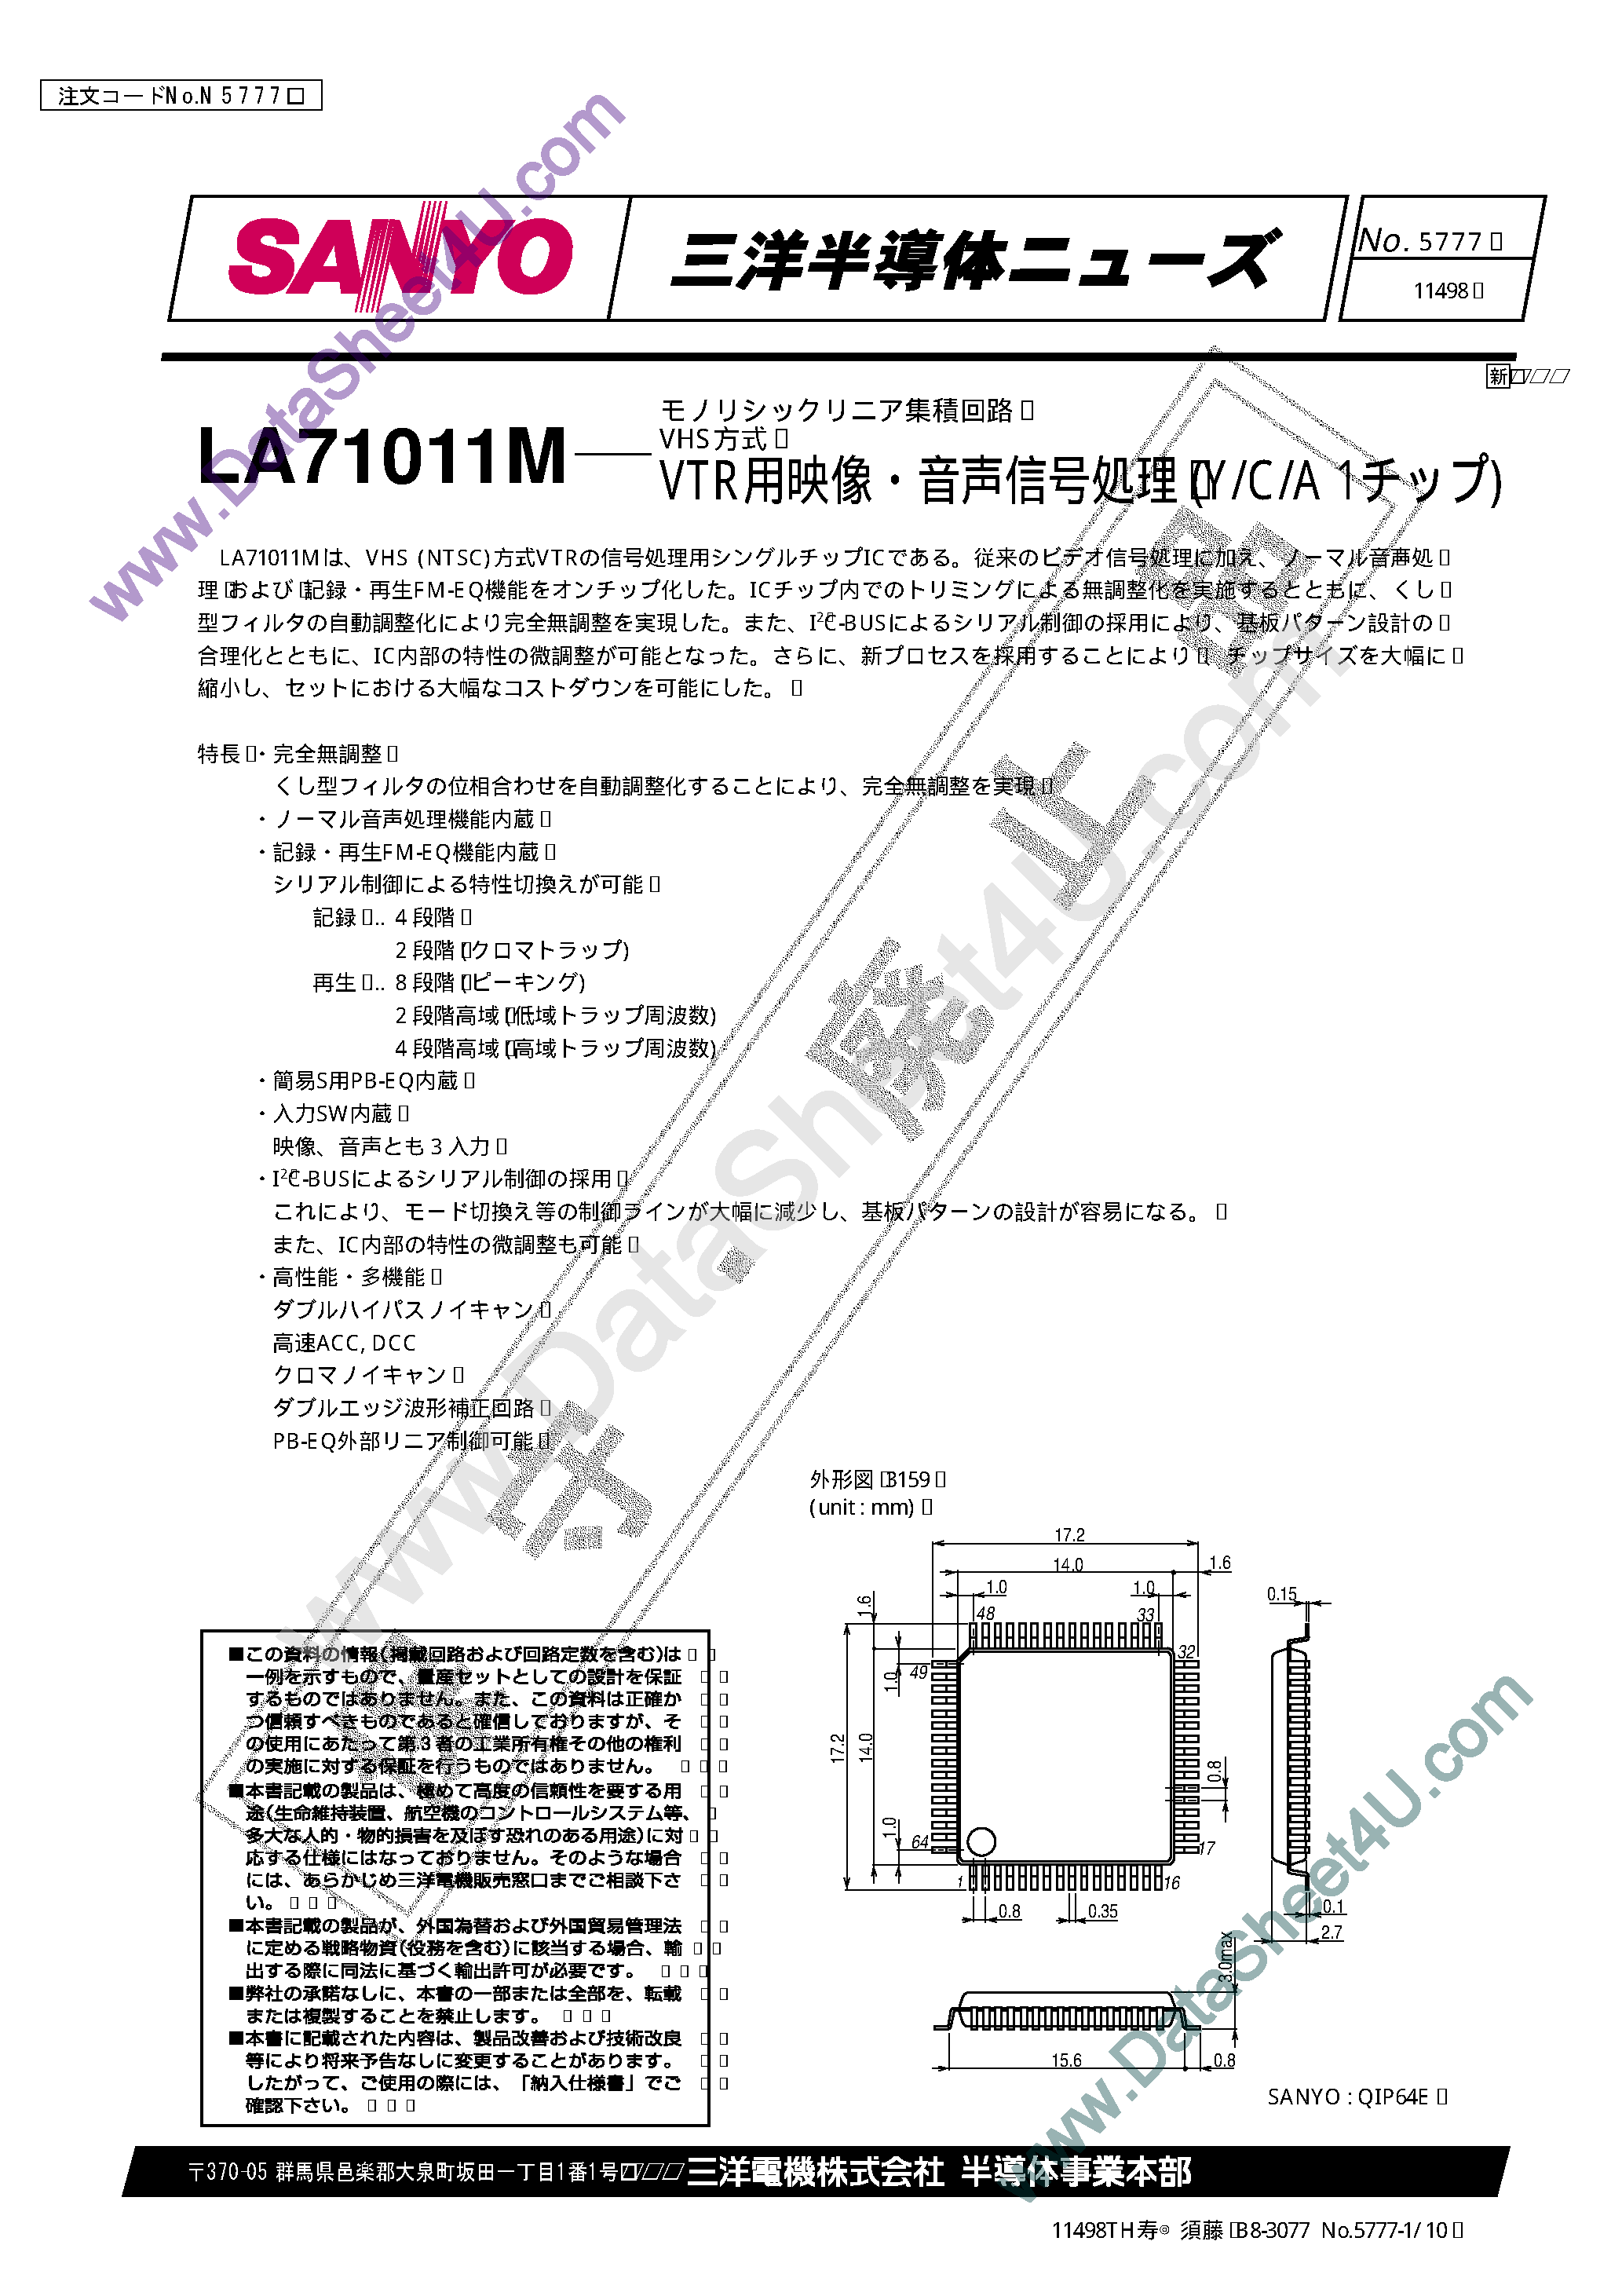 Datasheet LA71011M - VHS Video Y/c/a in a Single Chip page 1